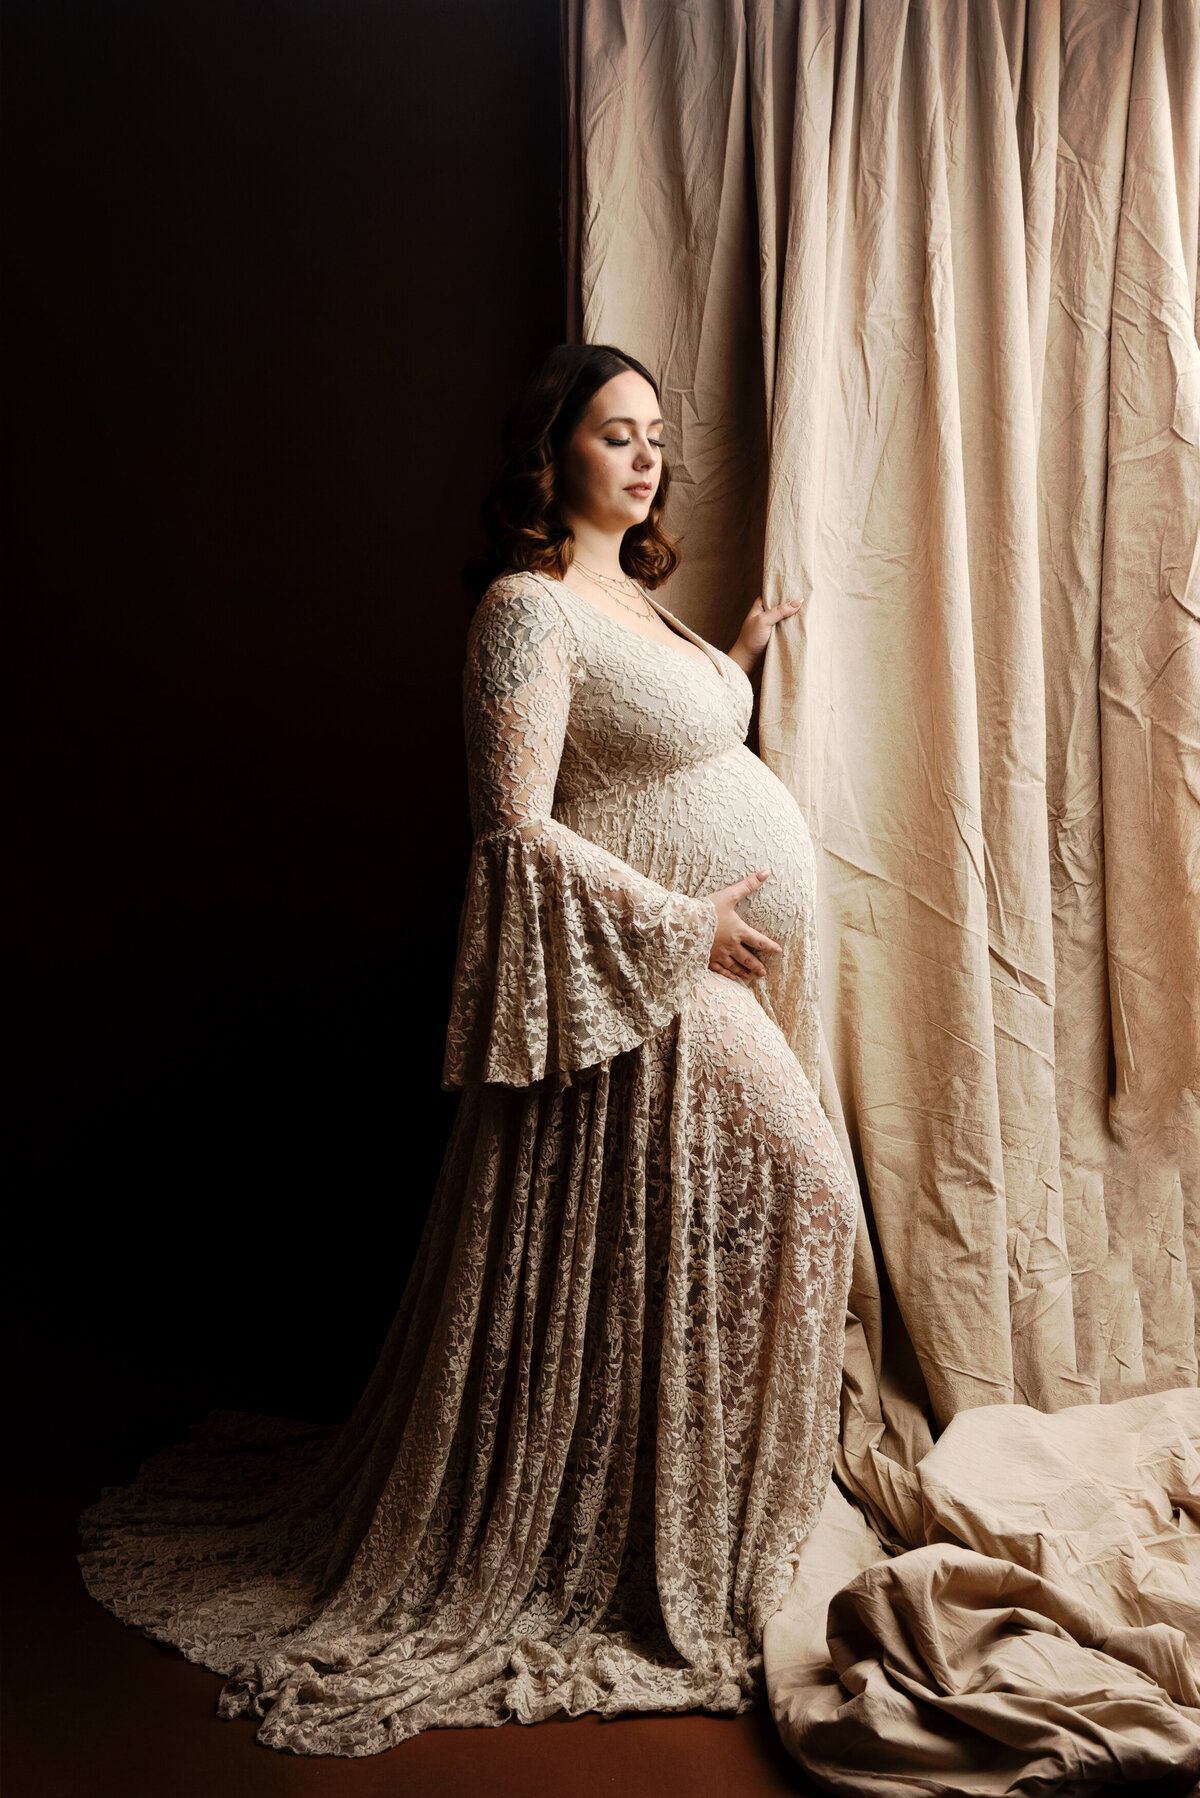 st-louis-maternity-photographer-mom-in-tan-lace-gown-standing-with-muslin-fabric-and-brown-backdrop